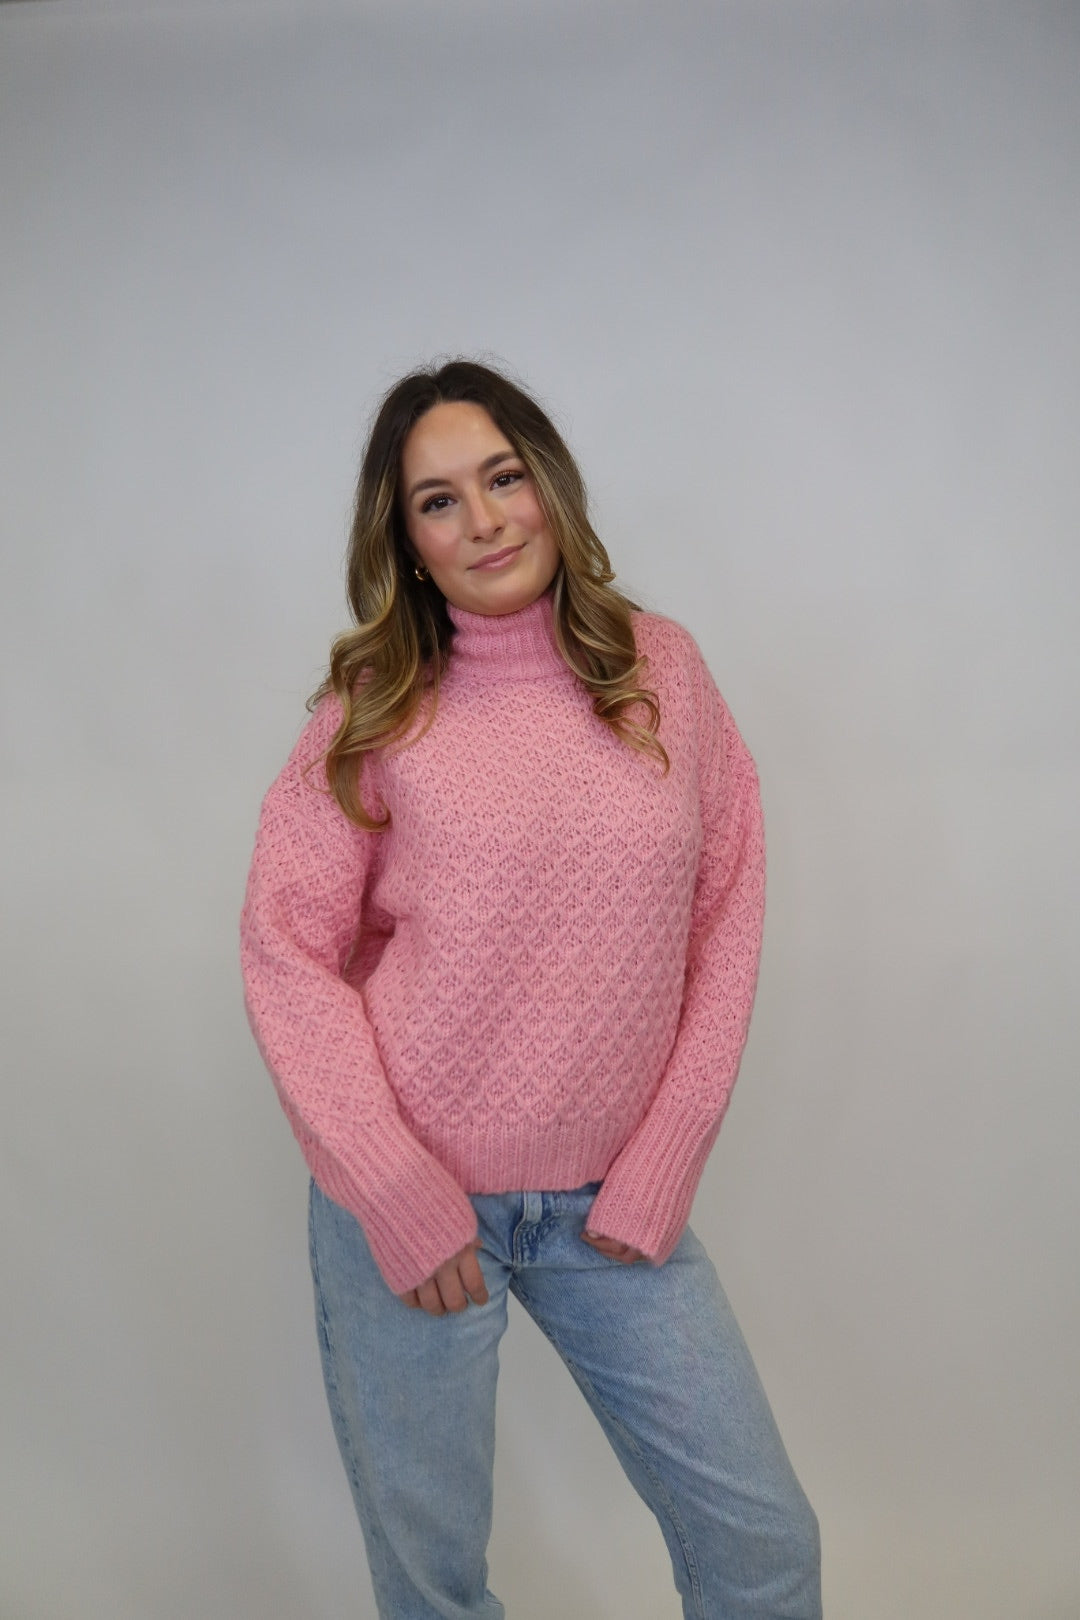 COTTON CANDY SKIES SWEATER